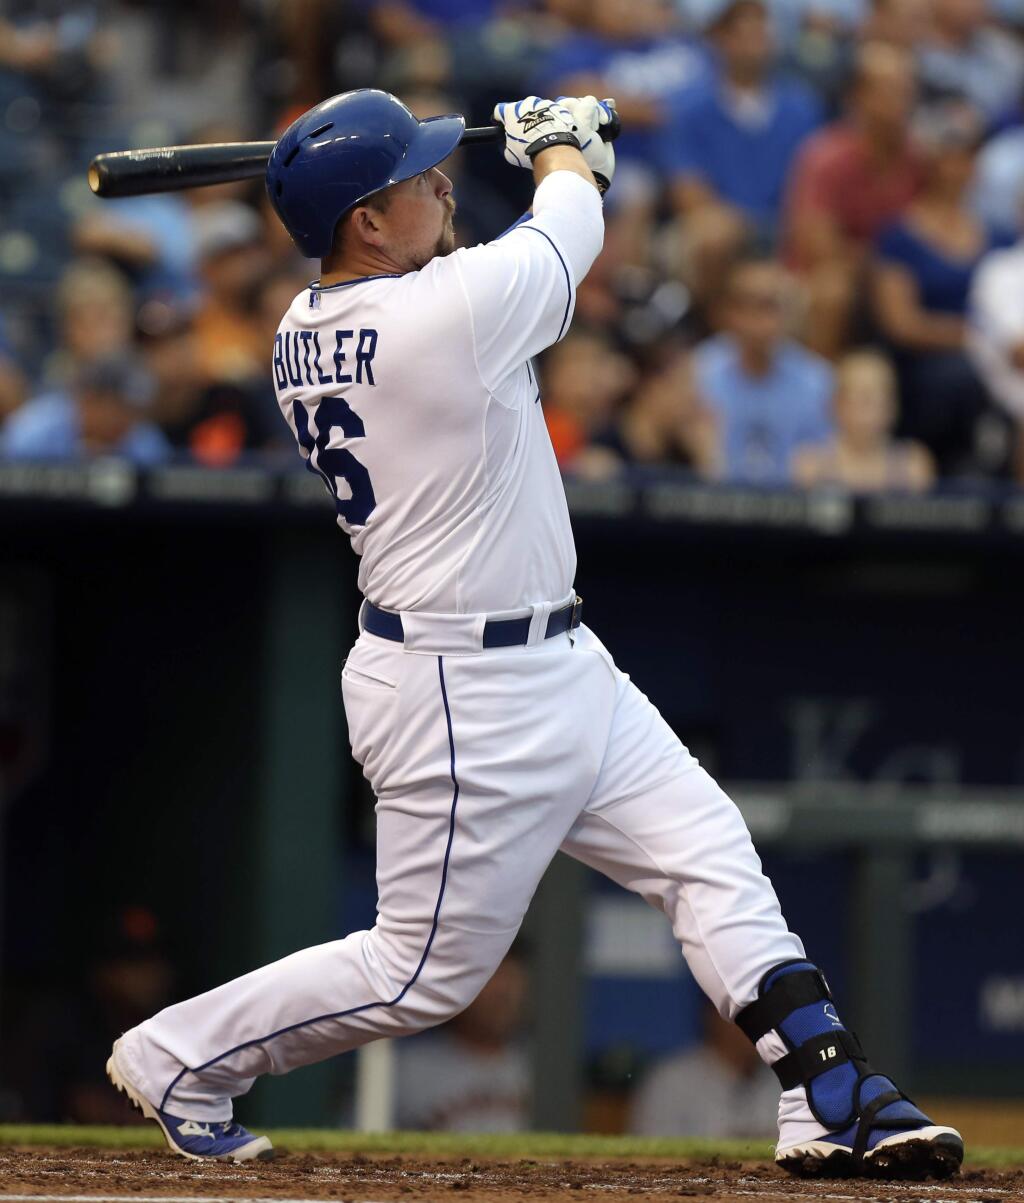 Kansas City Royals' Billy Butler hits a two-run home run in the first inning during a baseball game against the San Francisco Giants, Friday, Aug. 8, 2014, in Kansas City, Mo. (AP Photo/Ed Zurga)